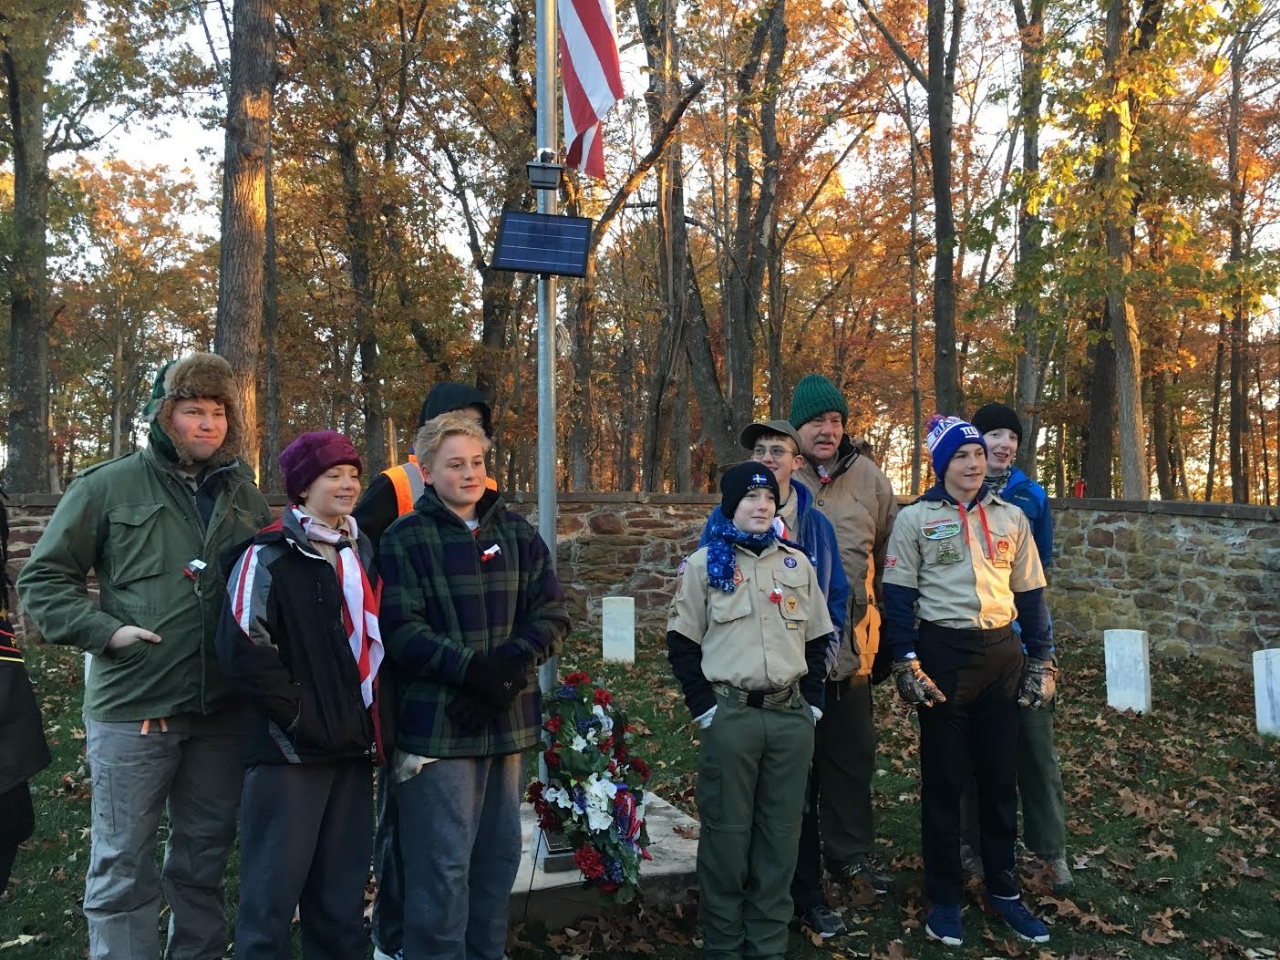 At the Veterans Day Sunrise Ceremony at Balls Bluff.